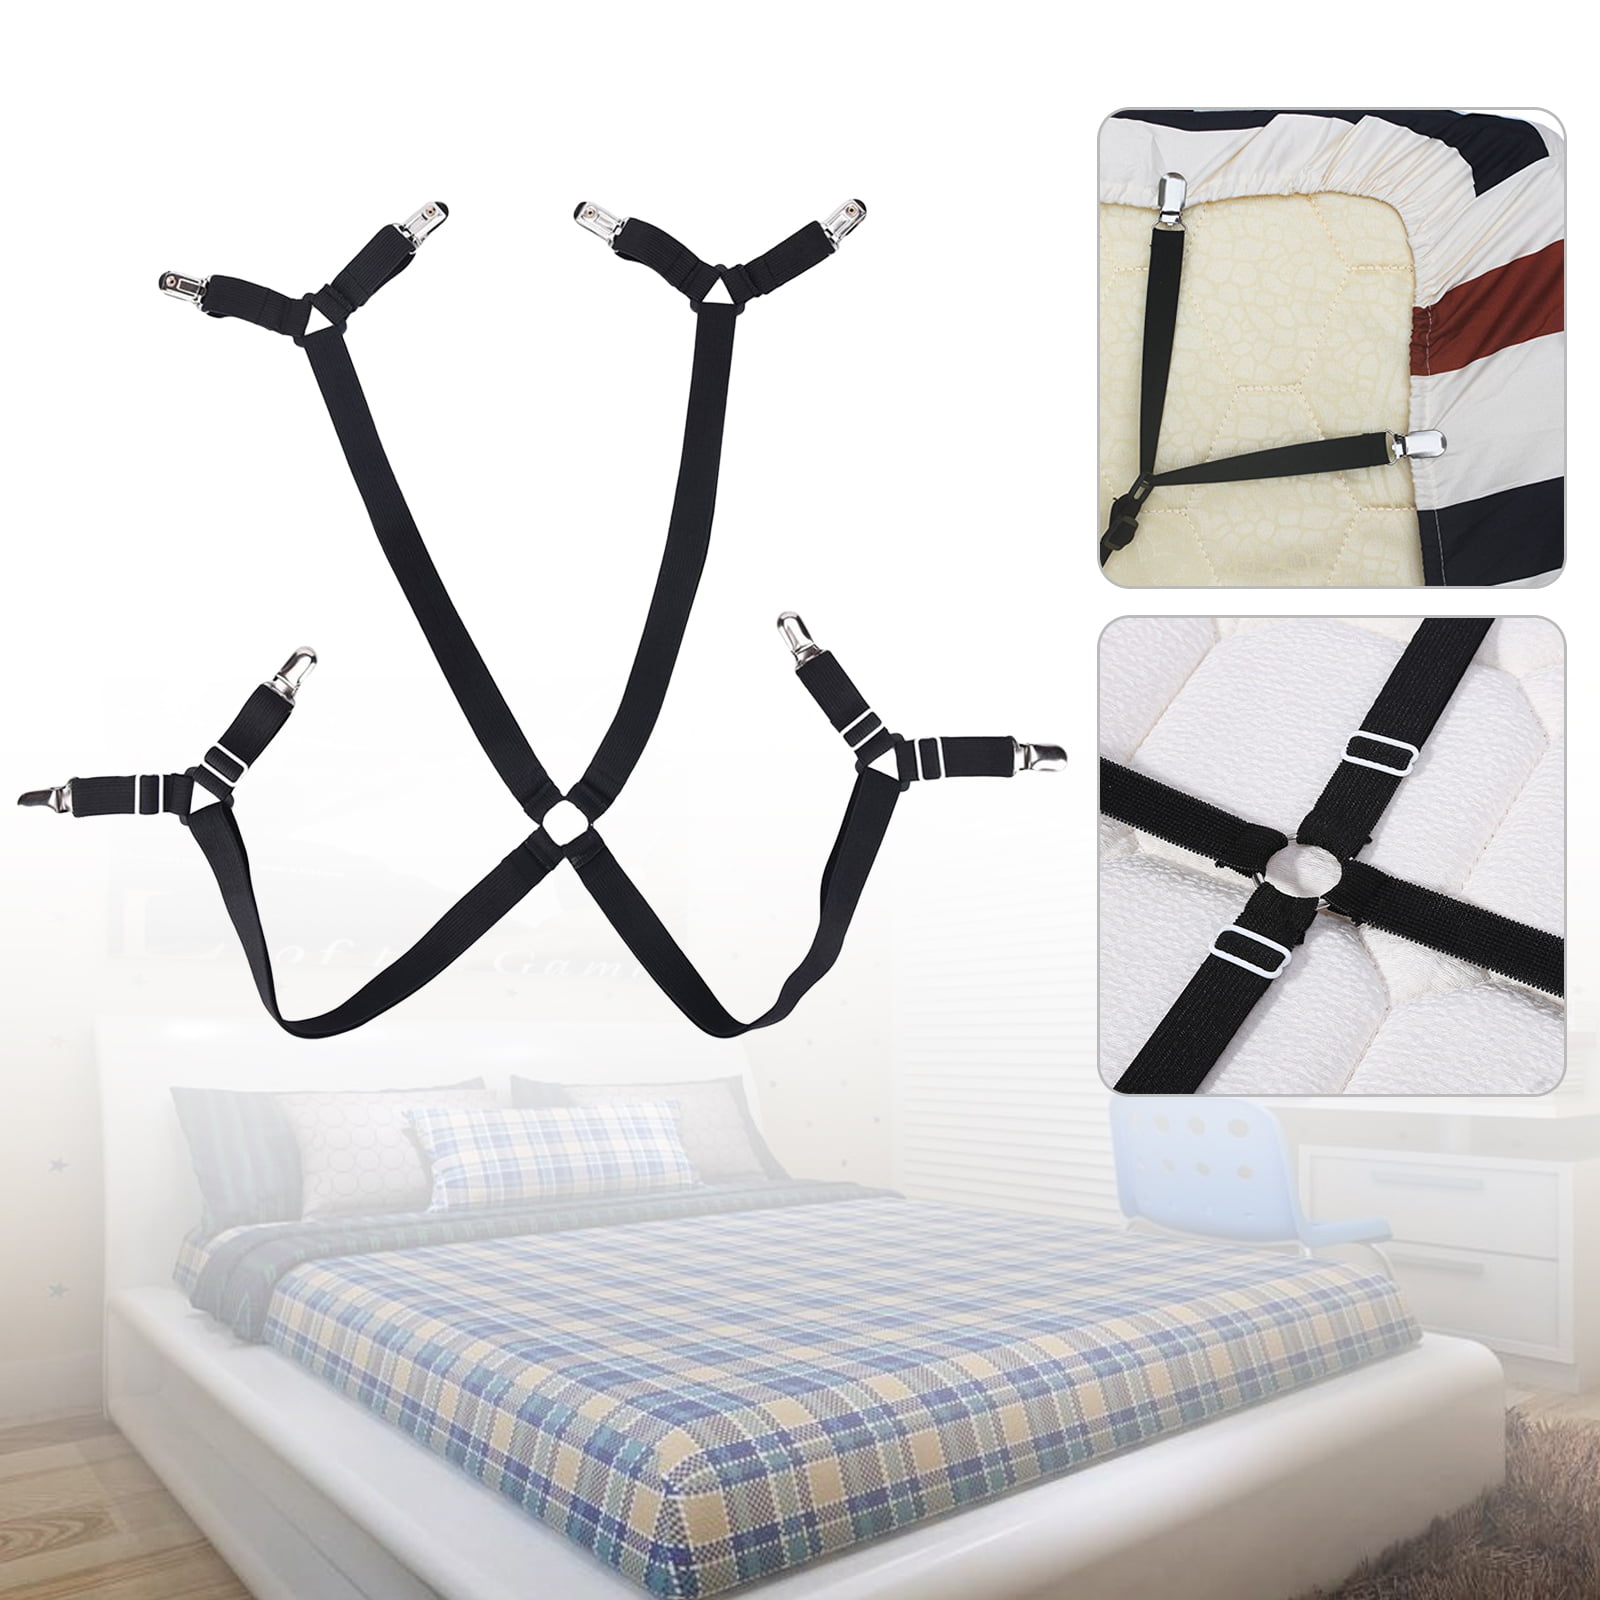 Fitted Triangle Bed Mattress Sheet Clip Grippers Strap Suspender Fastener Holder 